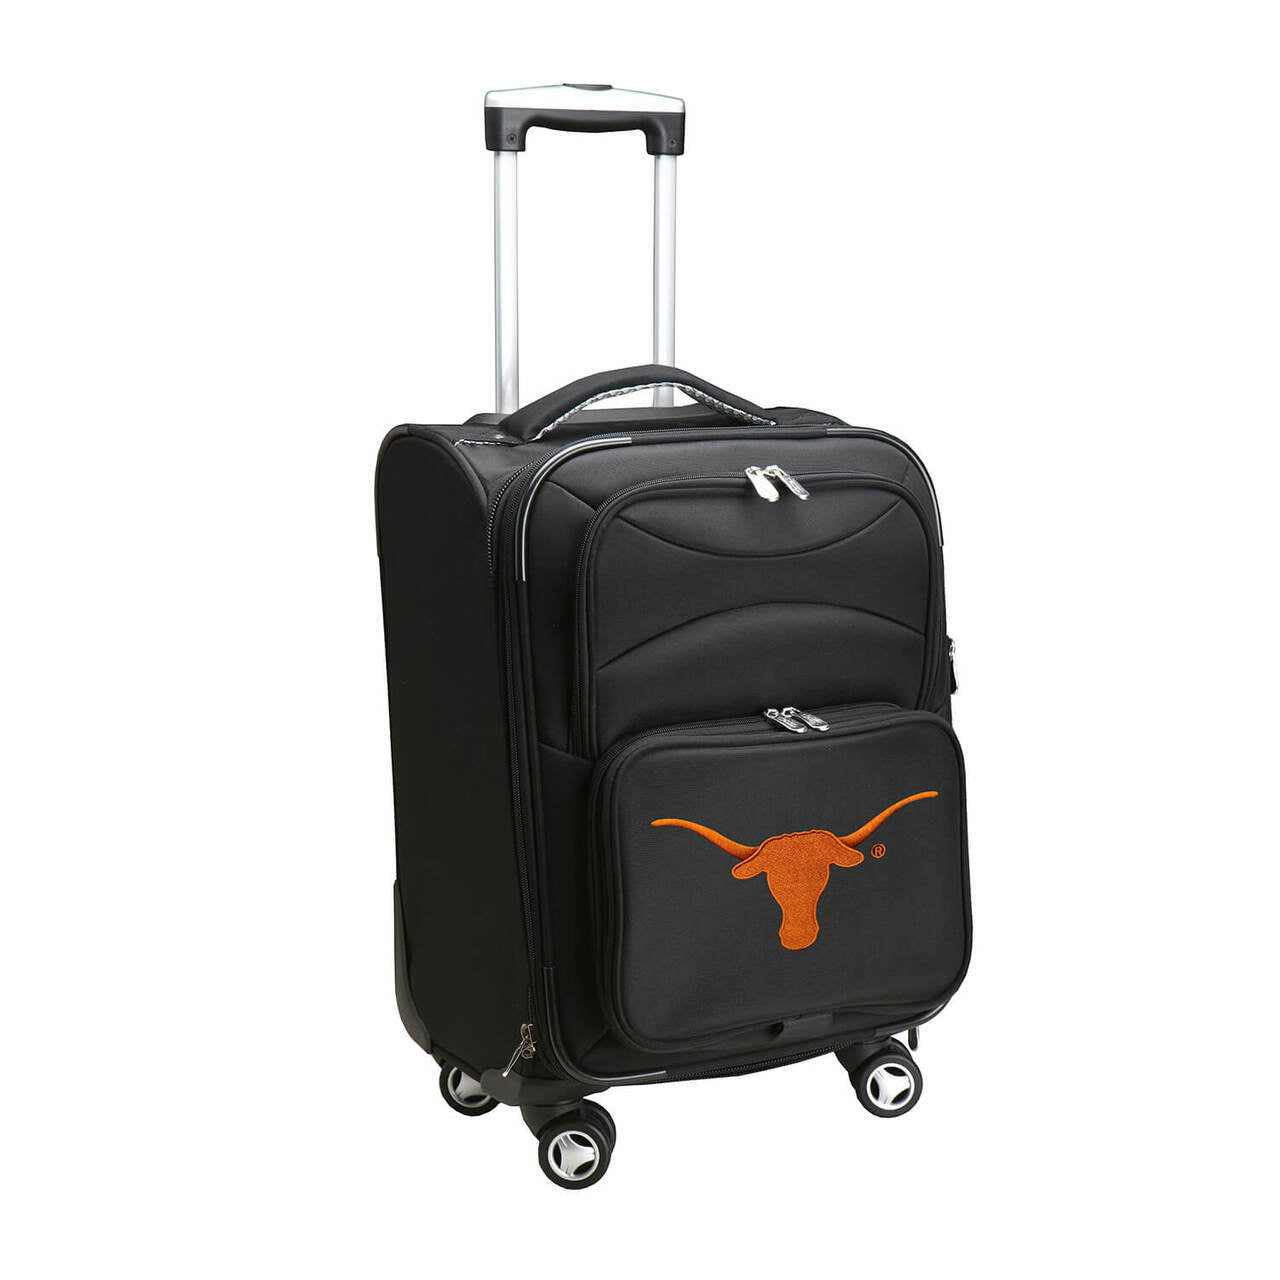 Texas Longhorns 21" Carry-on Spinner Luggage